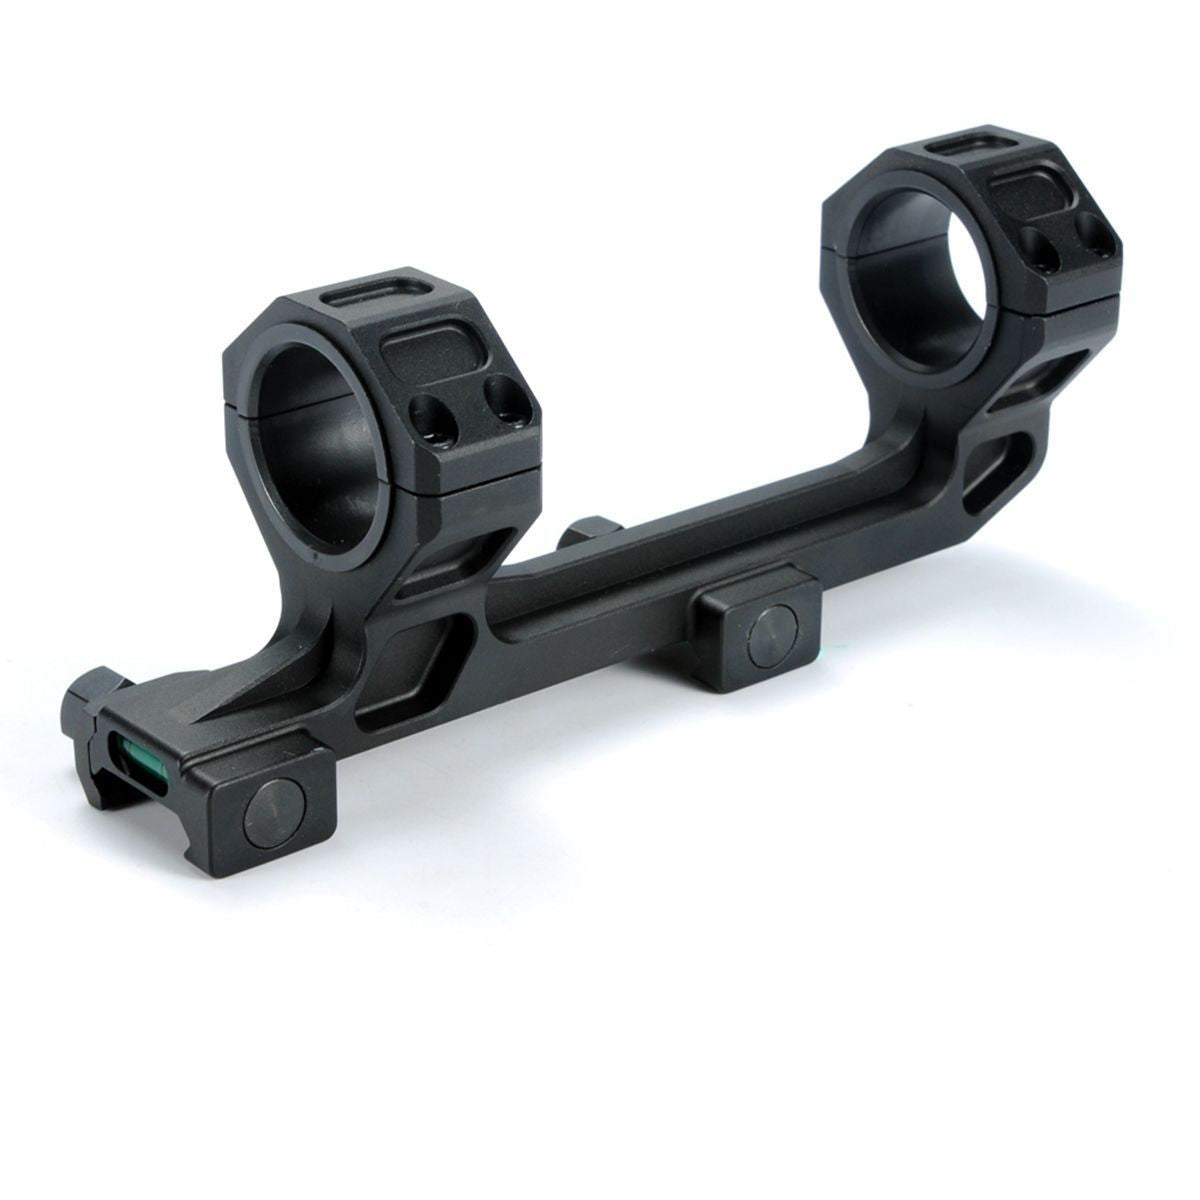 Scope Mount 30mm / 1 inch Rings One Piece with Bubble Level fits Picatinny Rails Scope Mounts &amp; Accessories - Green Blob Outdoors